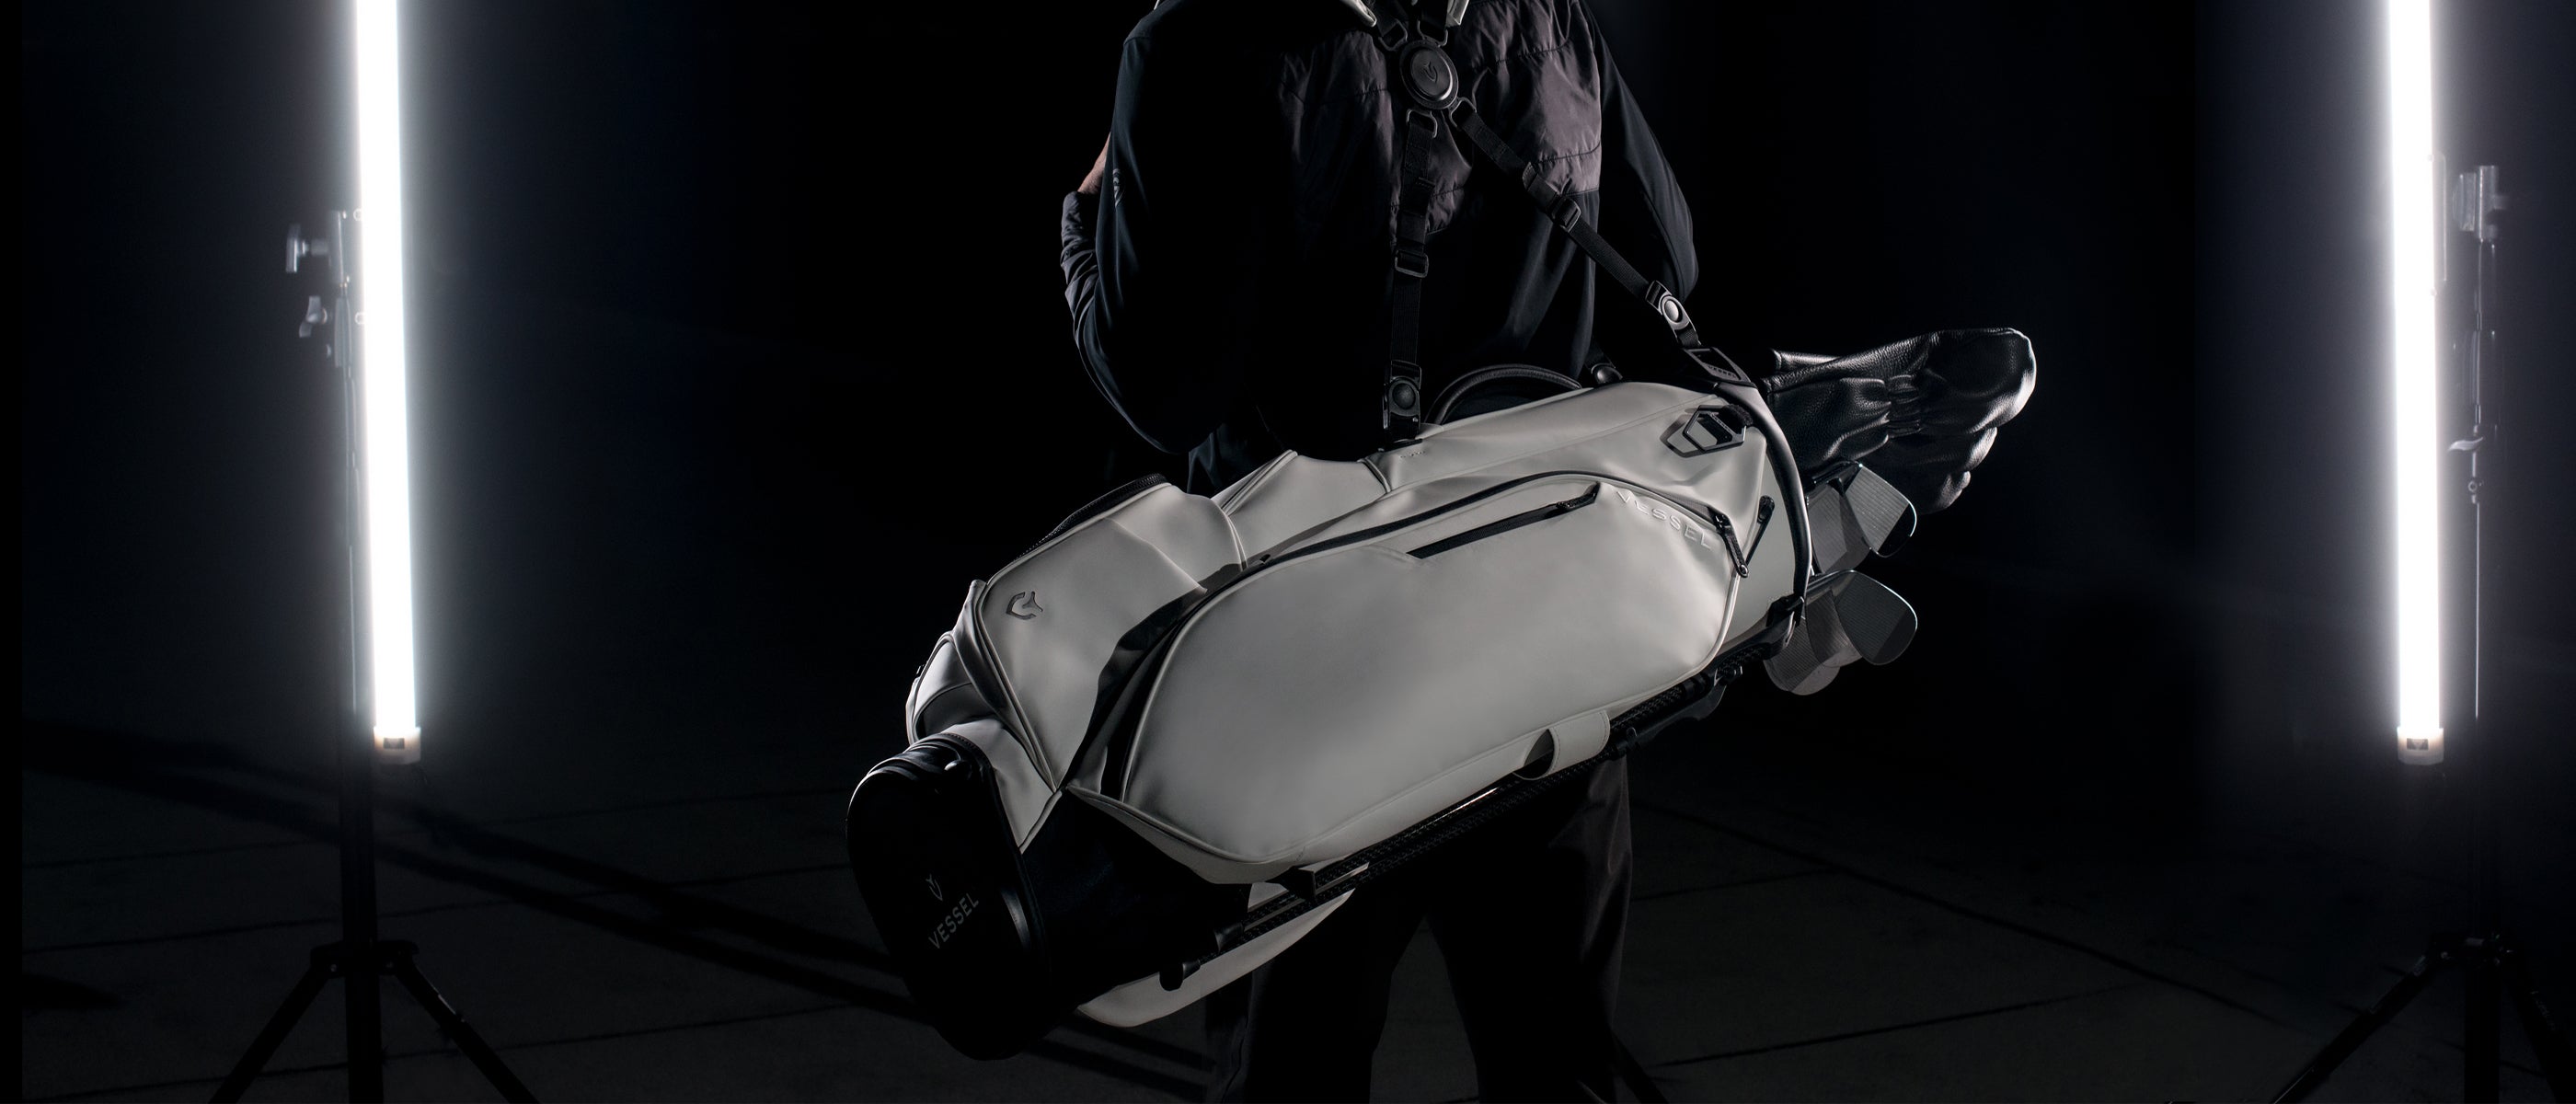 Model in black carries a white golf stand bag on his back in a dark studio with two studio lights